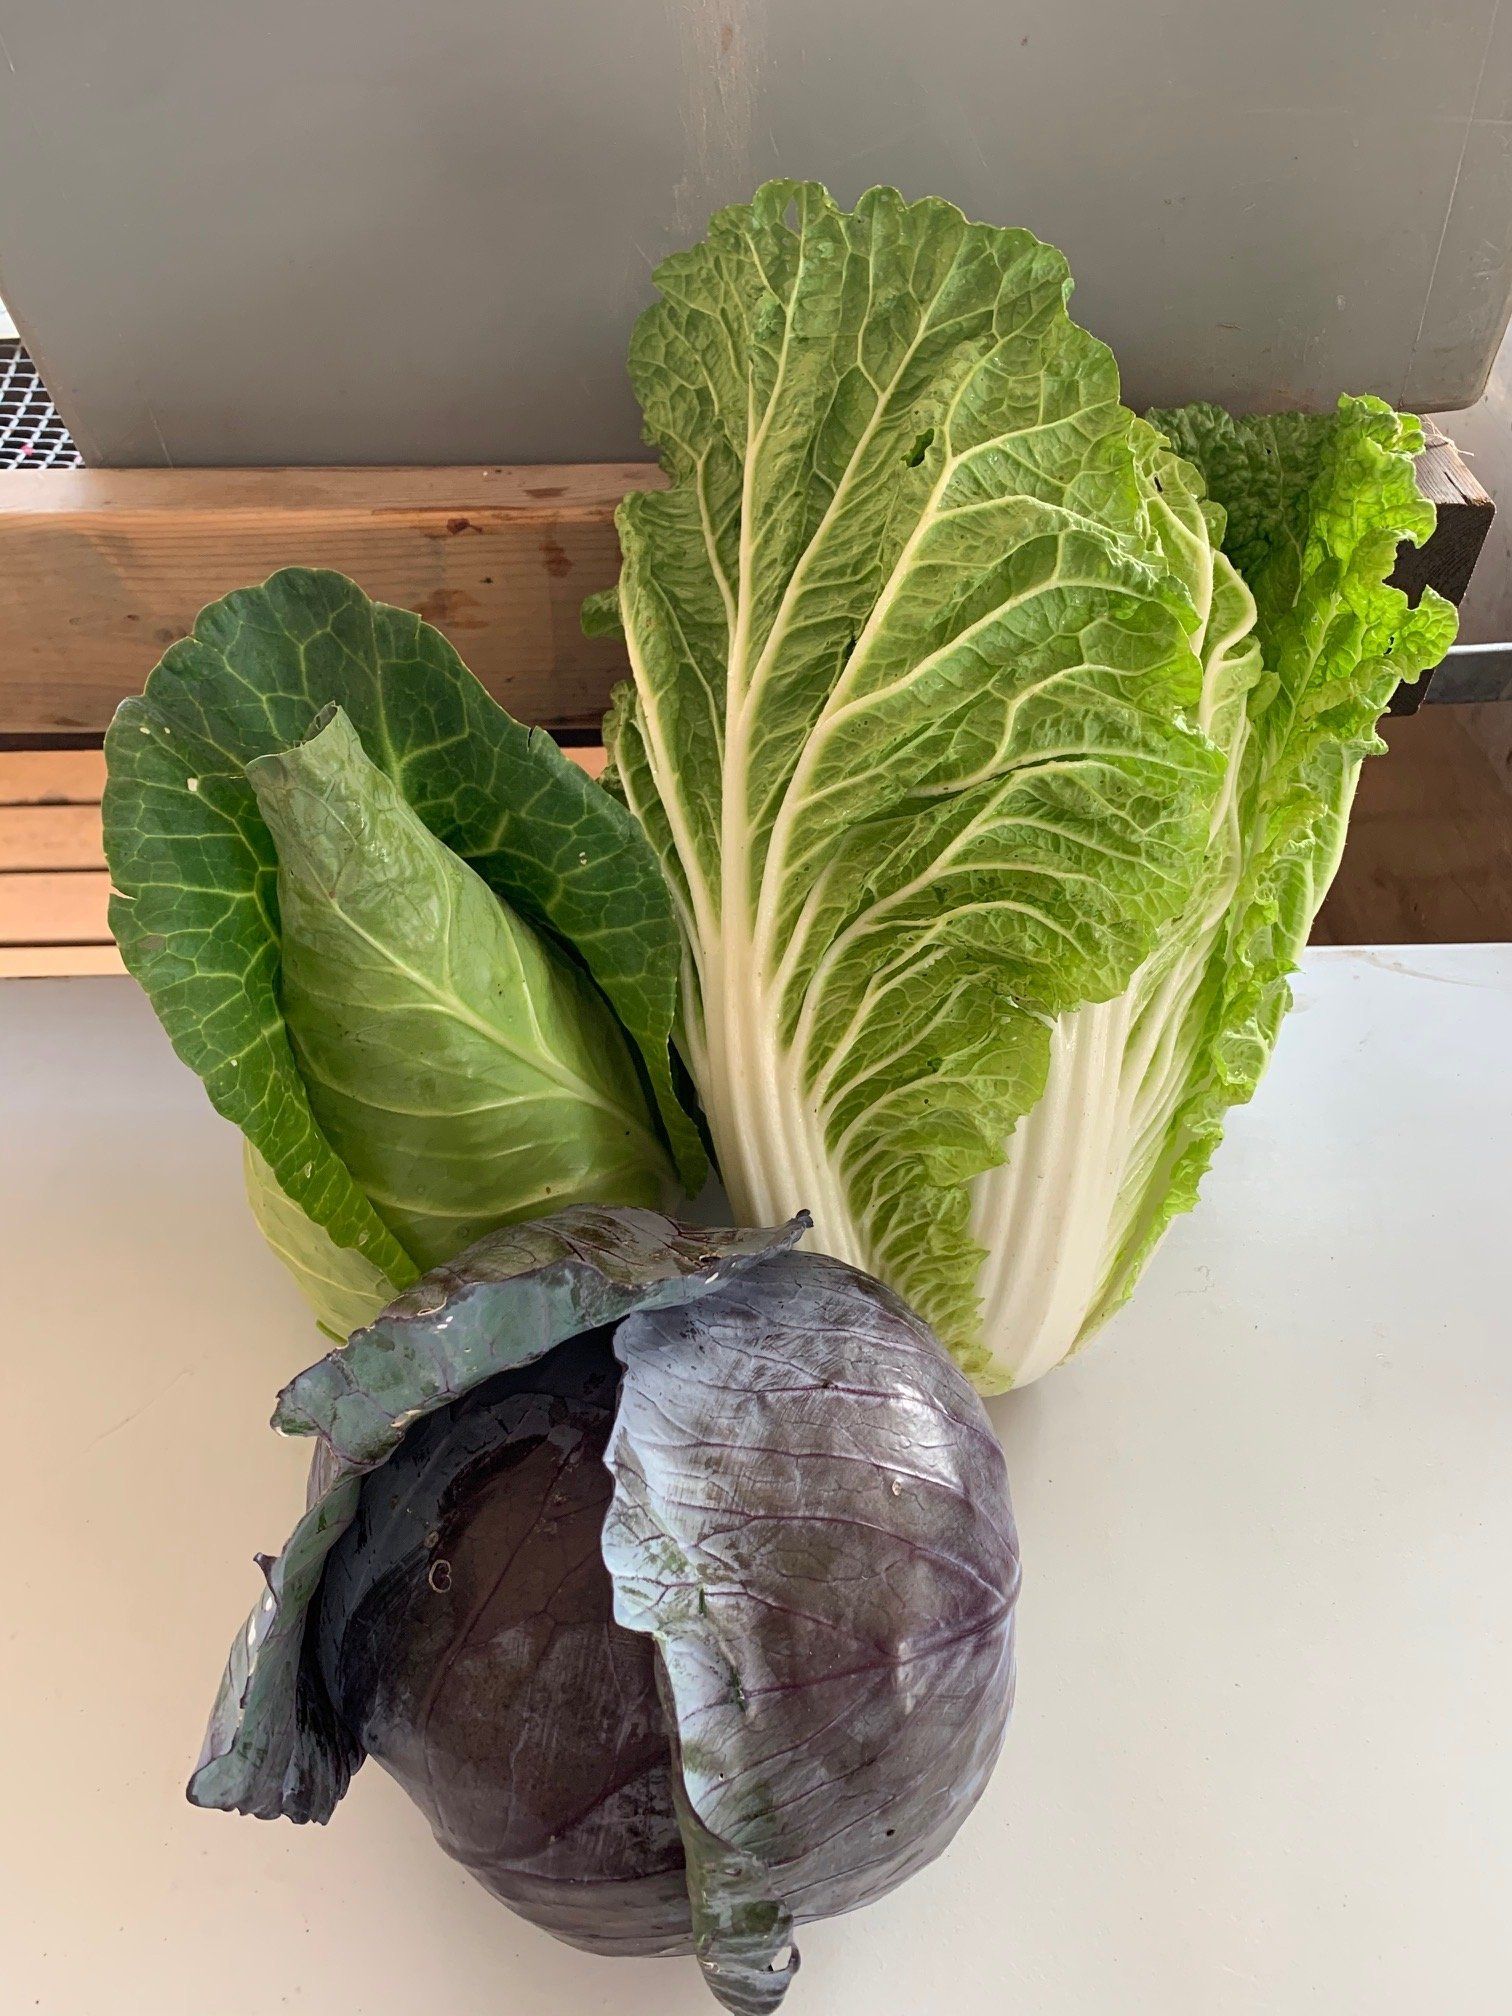 What can we do with all this cabbage?